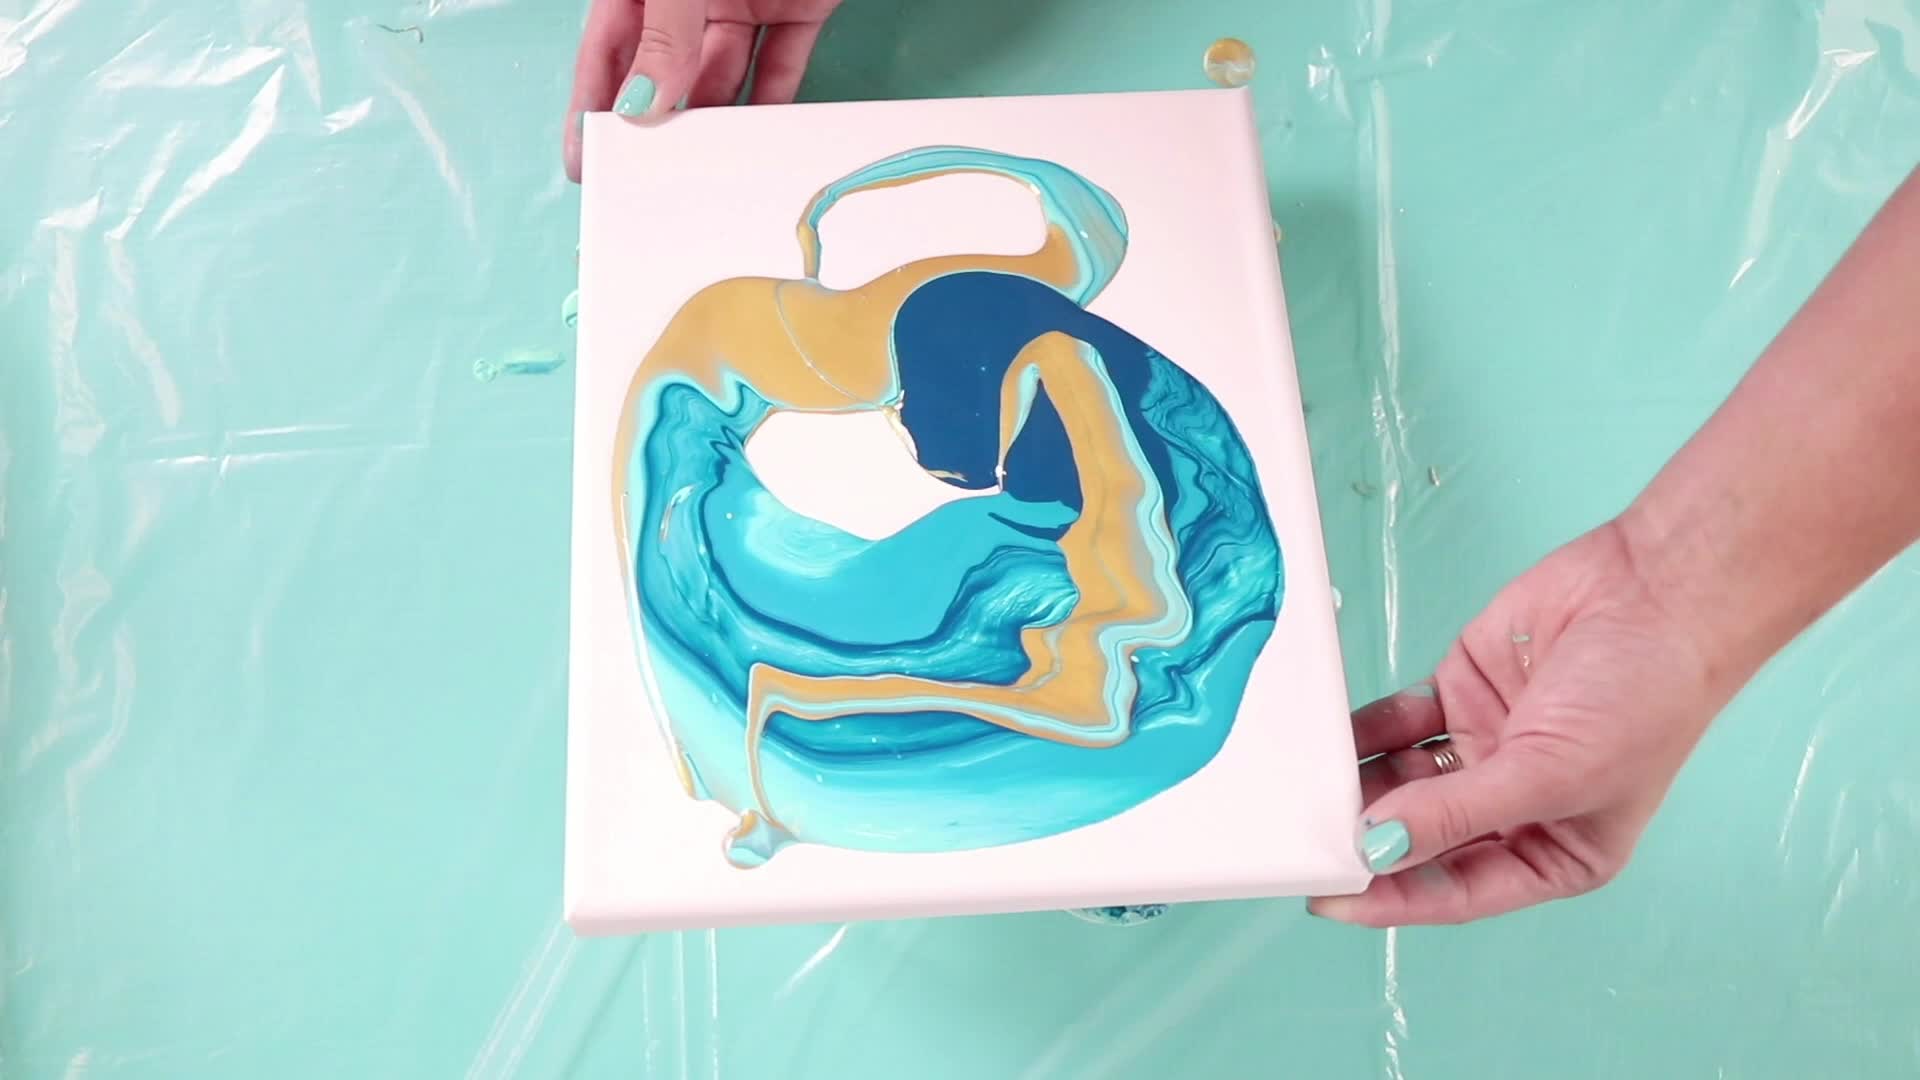 DIY Pour Painting with JOANN - Crafts